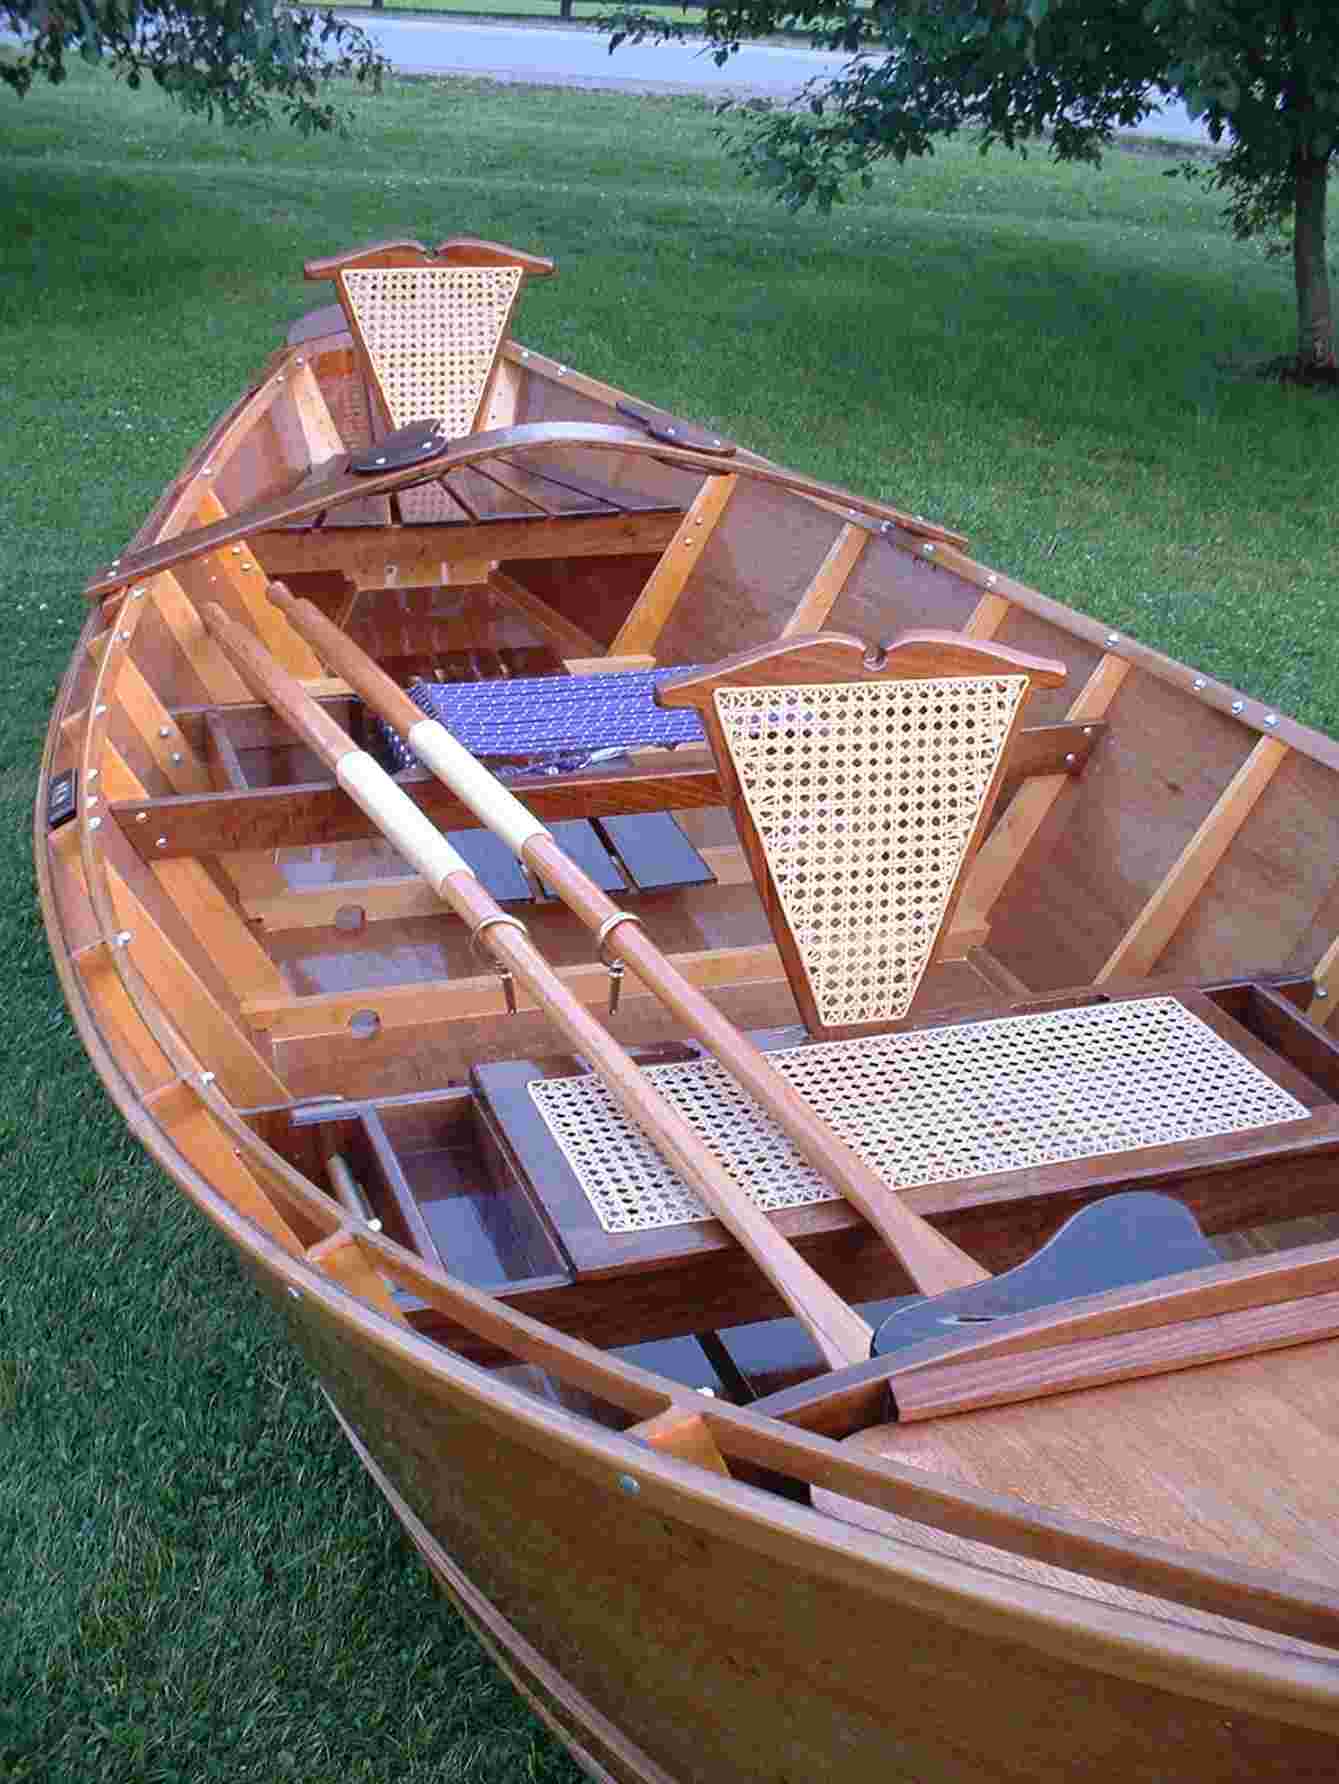 Building a Wooden Flyfishing Boat